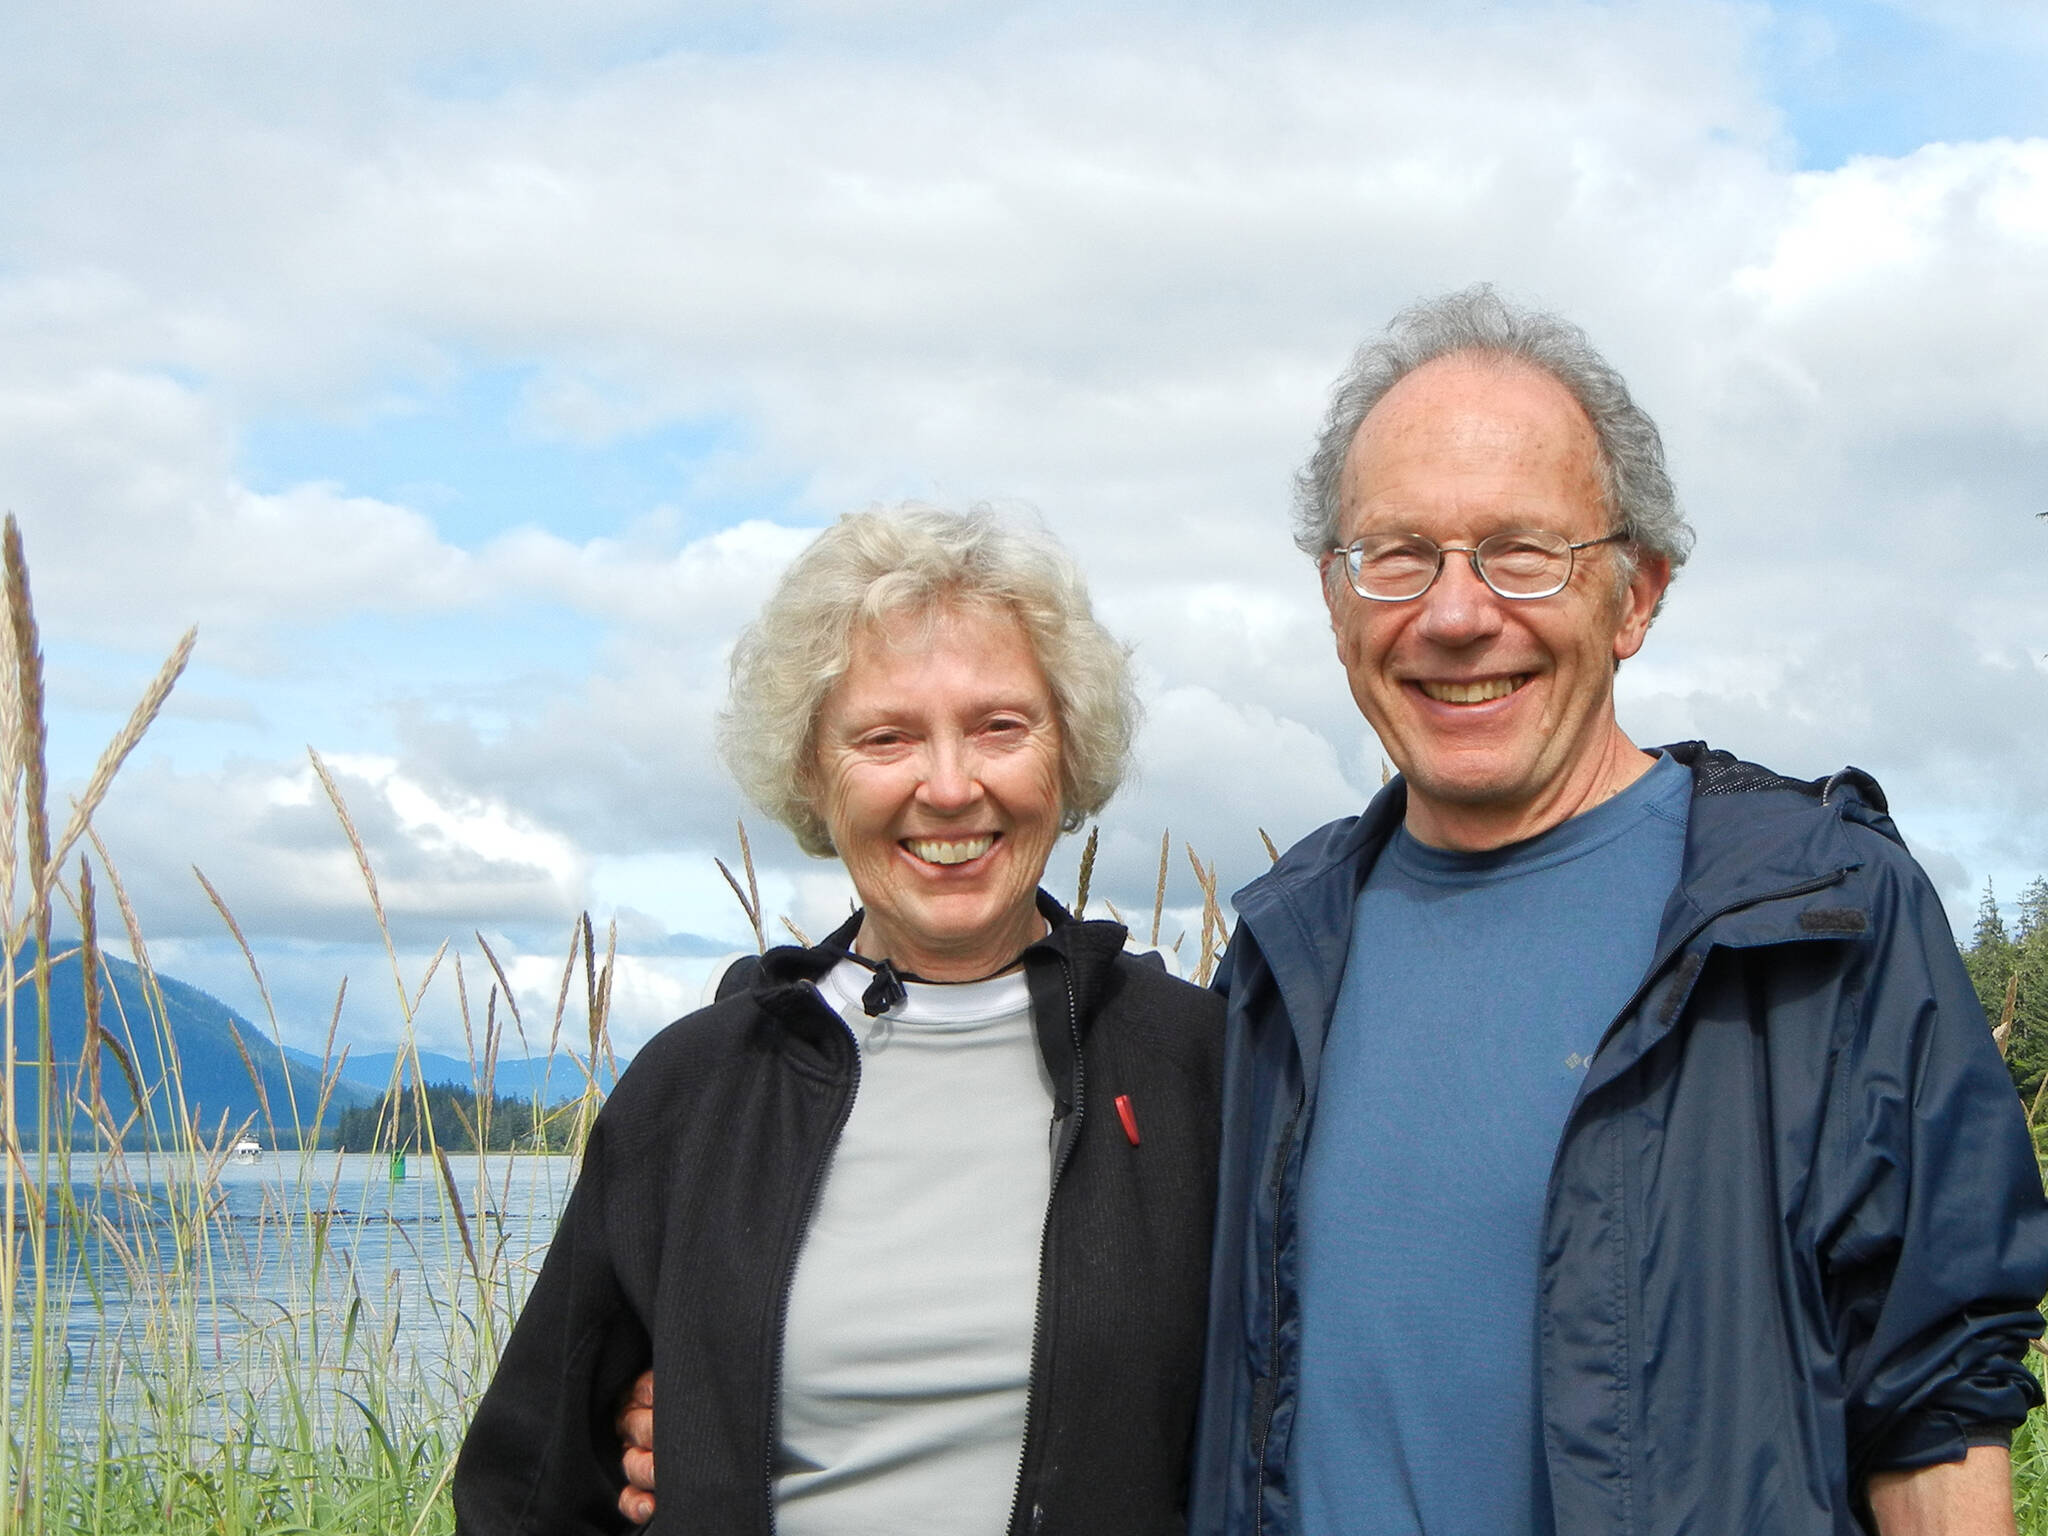 Yvonne and Johnny Palka, pictured here in 2012 in Alaska during a retreat. (Photo provided)